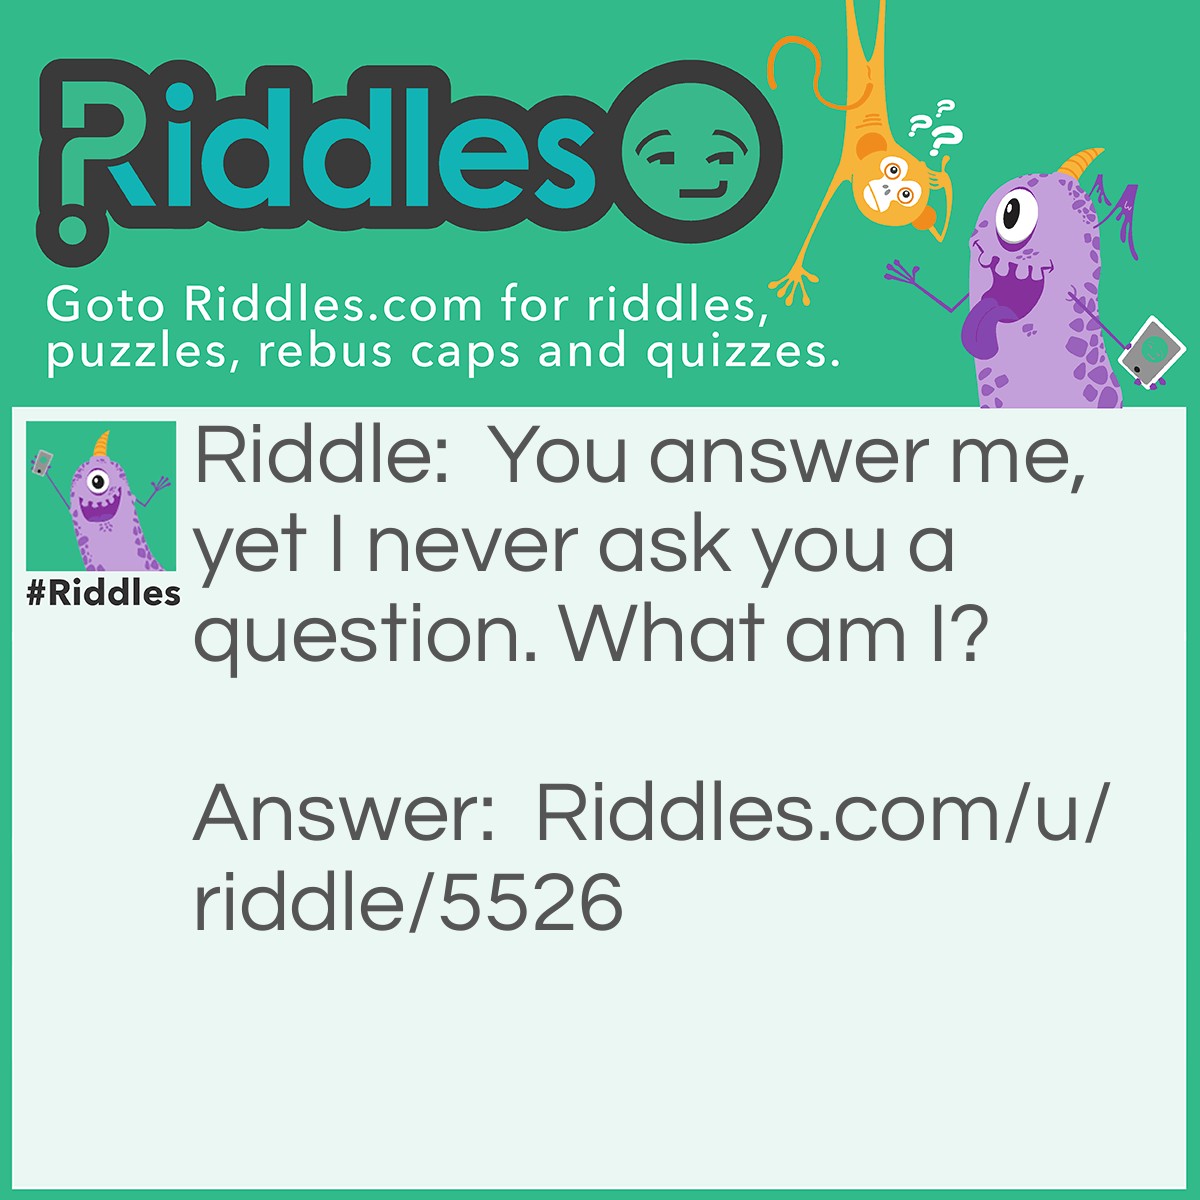 Riddle: You answer me, yet I never ask you a question. What am I? Answer: A phone.